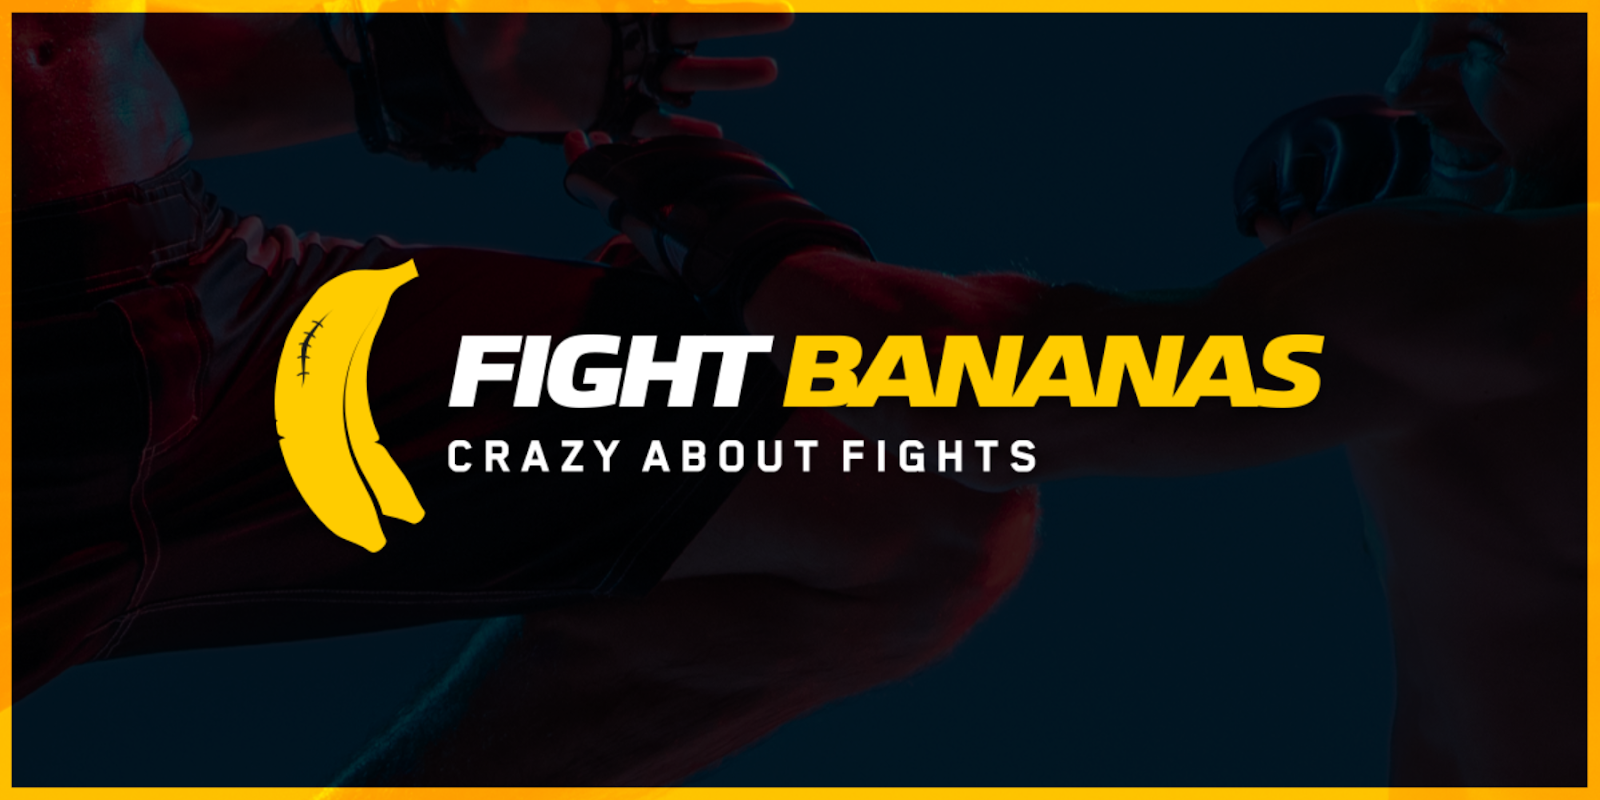 Fight Bananas, Sunday, April 11, 2021, Press release picture